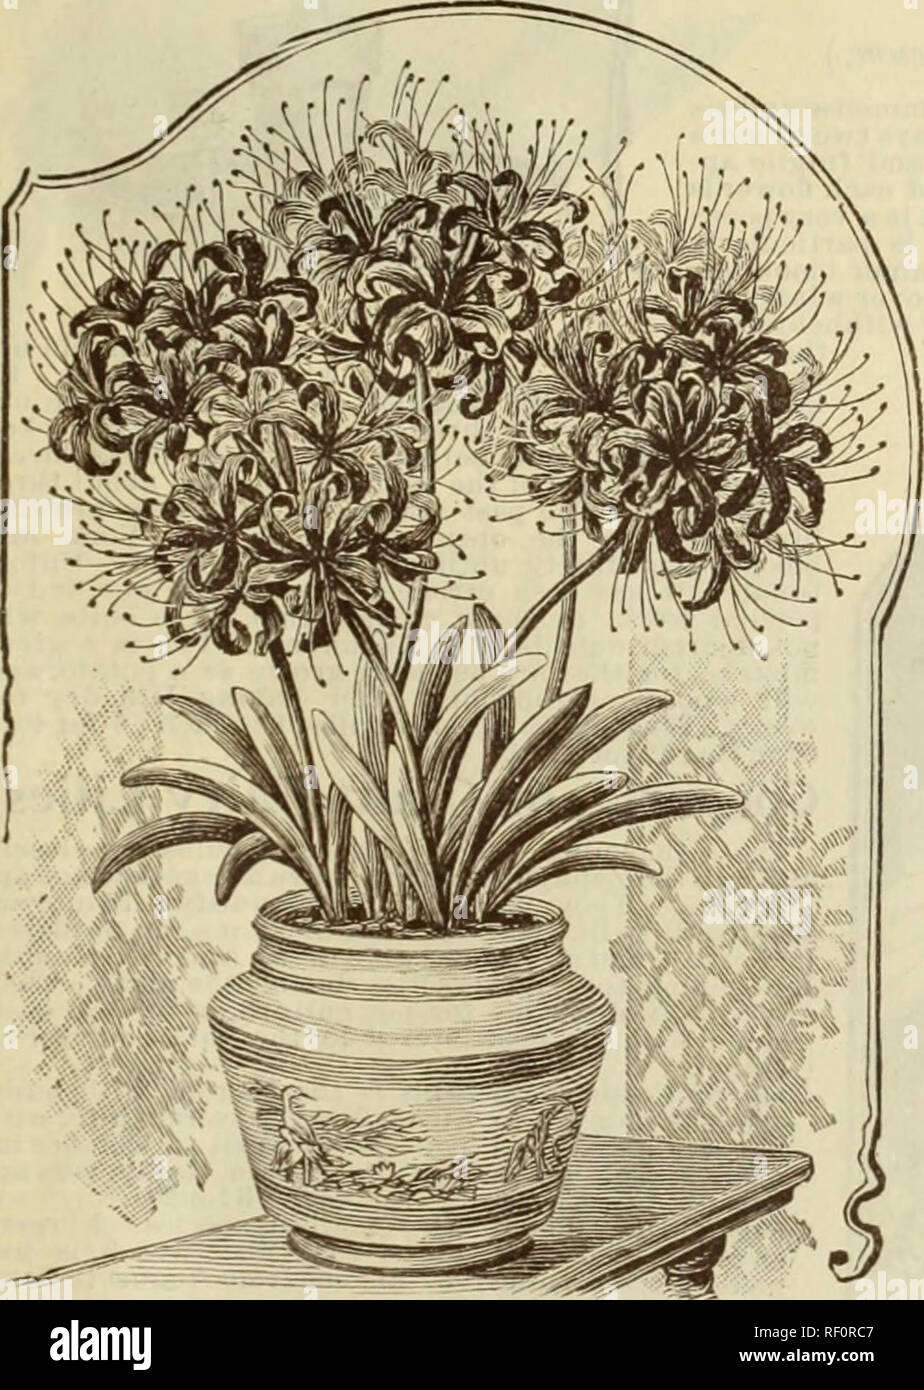 . Catalogue of rare Florida flowers and fruits : season of 1894. Nurseries (Horticulture) Florida Catalogs; Flowers Catalogs; Plants, Ornamental Catalogs. I â KI . U M r E U U N C U L A T U M . Crinum Americanum. An evergreen species and of the easiest culture, is best grown as a jjot plant and can be wintered in the cellar if the soil is kept nearly dry. Its large, white, exquisitely fragrant, Lily-like flowers are i)roduced in an umbel and borne on a tall scape. A striking plant and far more beautiful than many of the high-priced Amaryllis, and in cultivation blooms several times a year. It Stock Photo